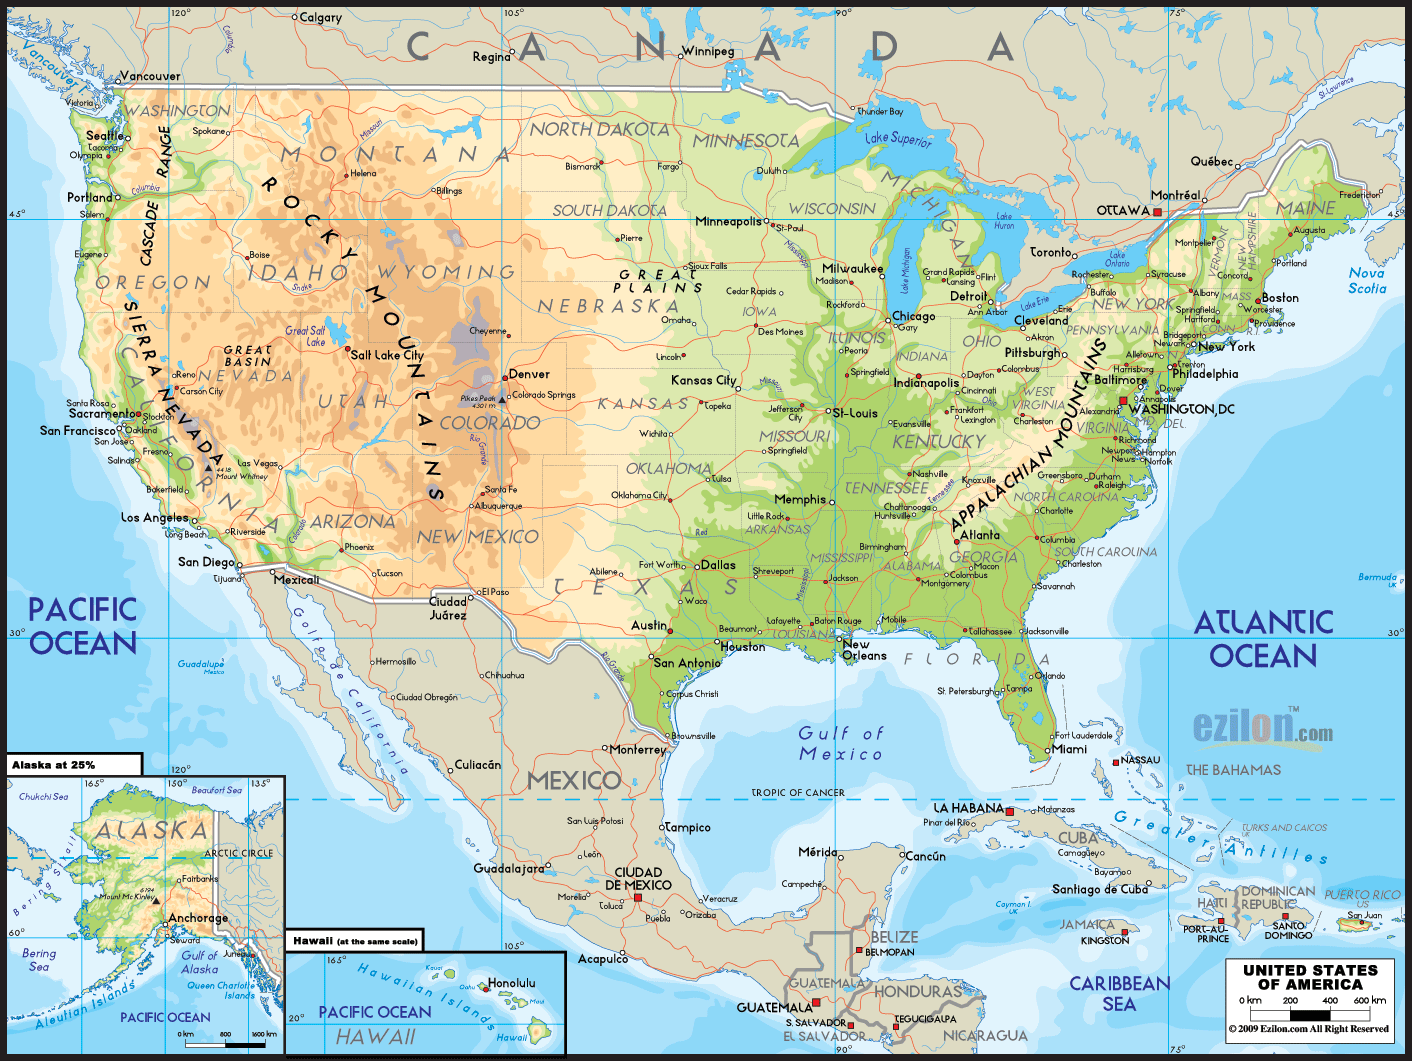 detailed-clear-large-road-map-of-united-states-of-america-ezilon-maps